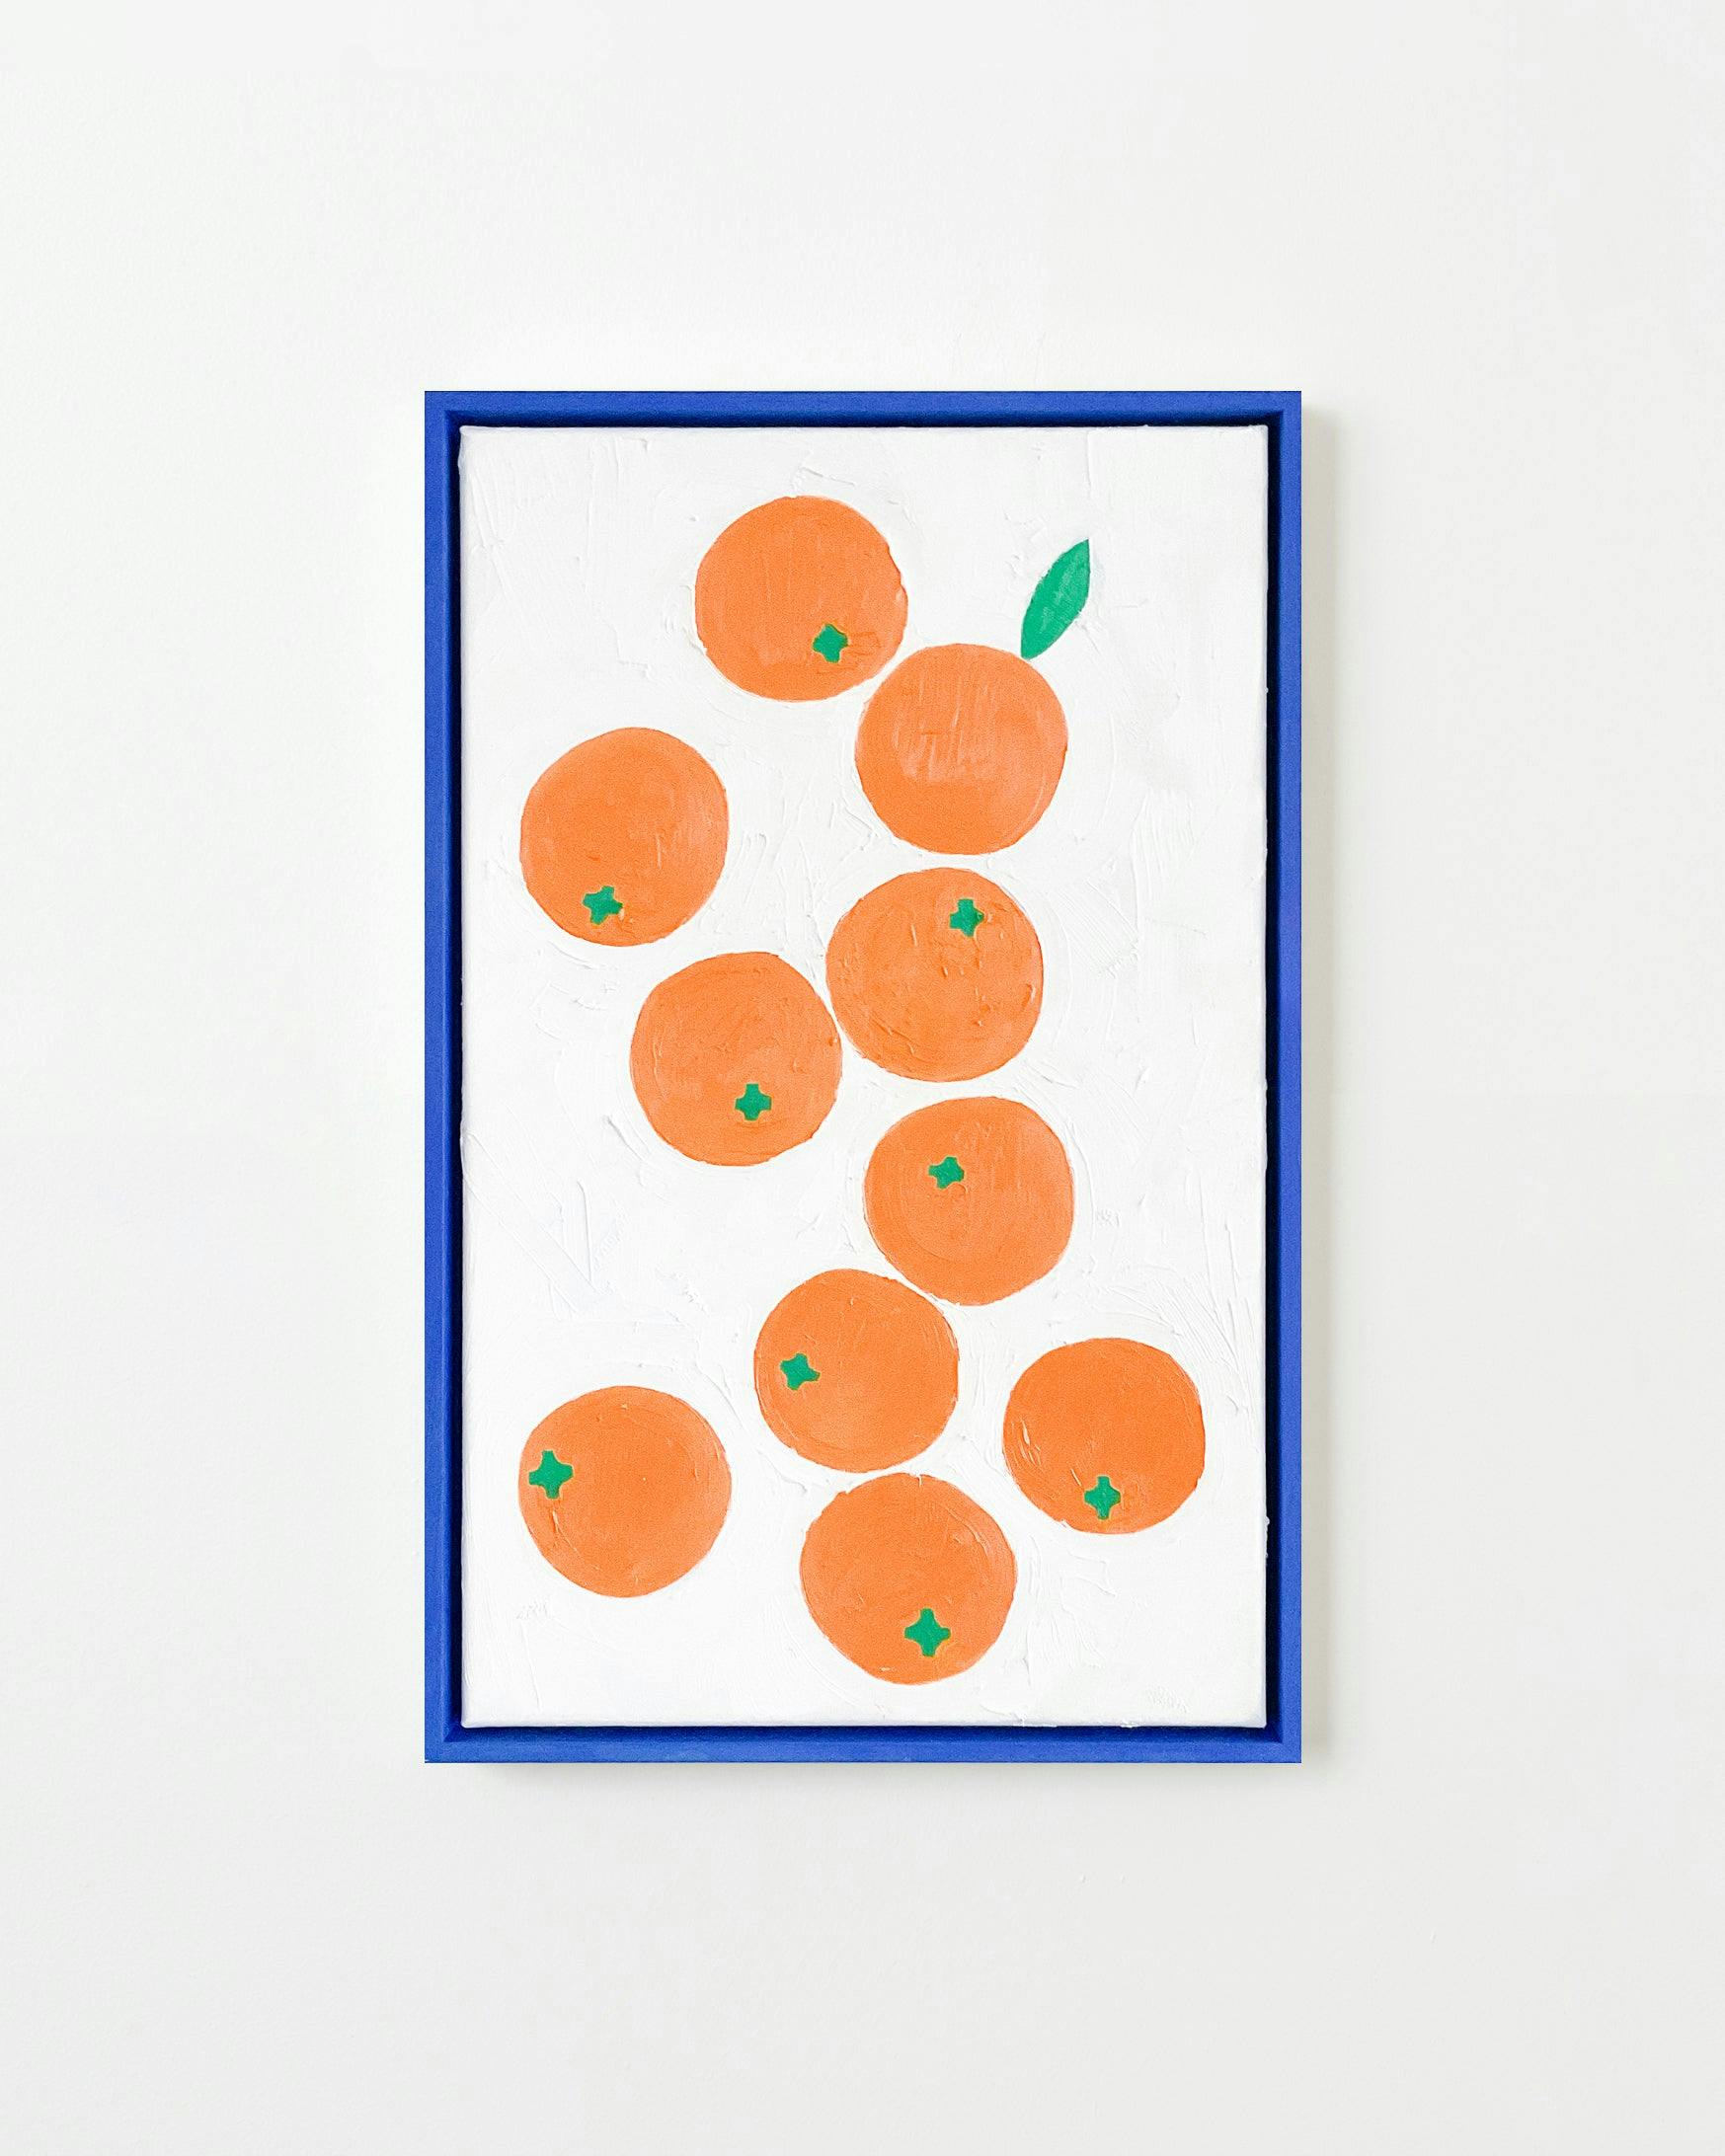 Painting by Frederique Matti titled "Oranges".